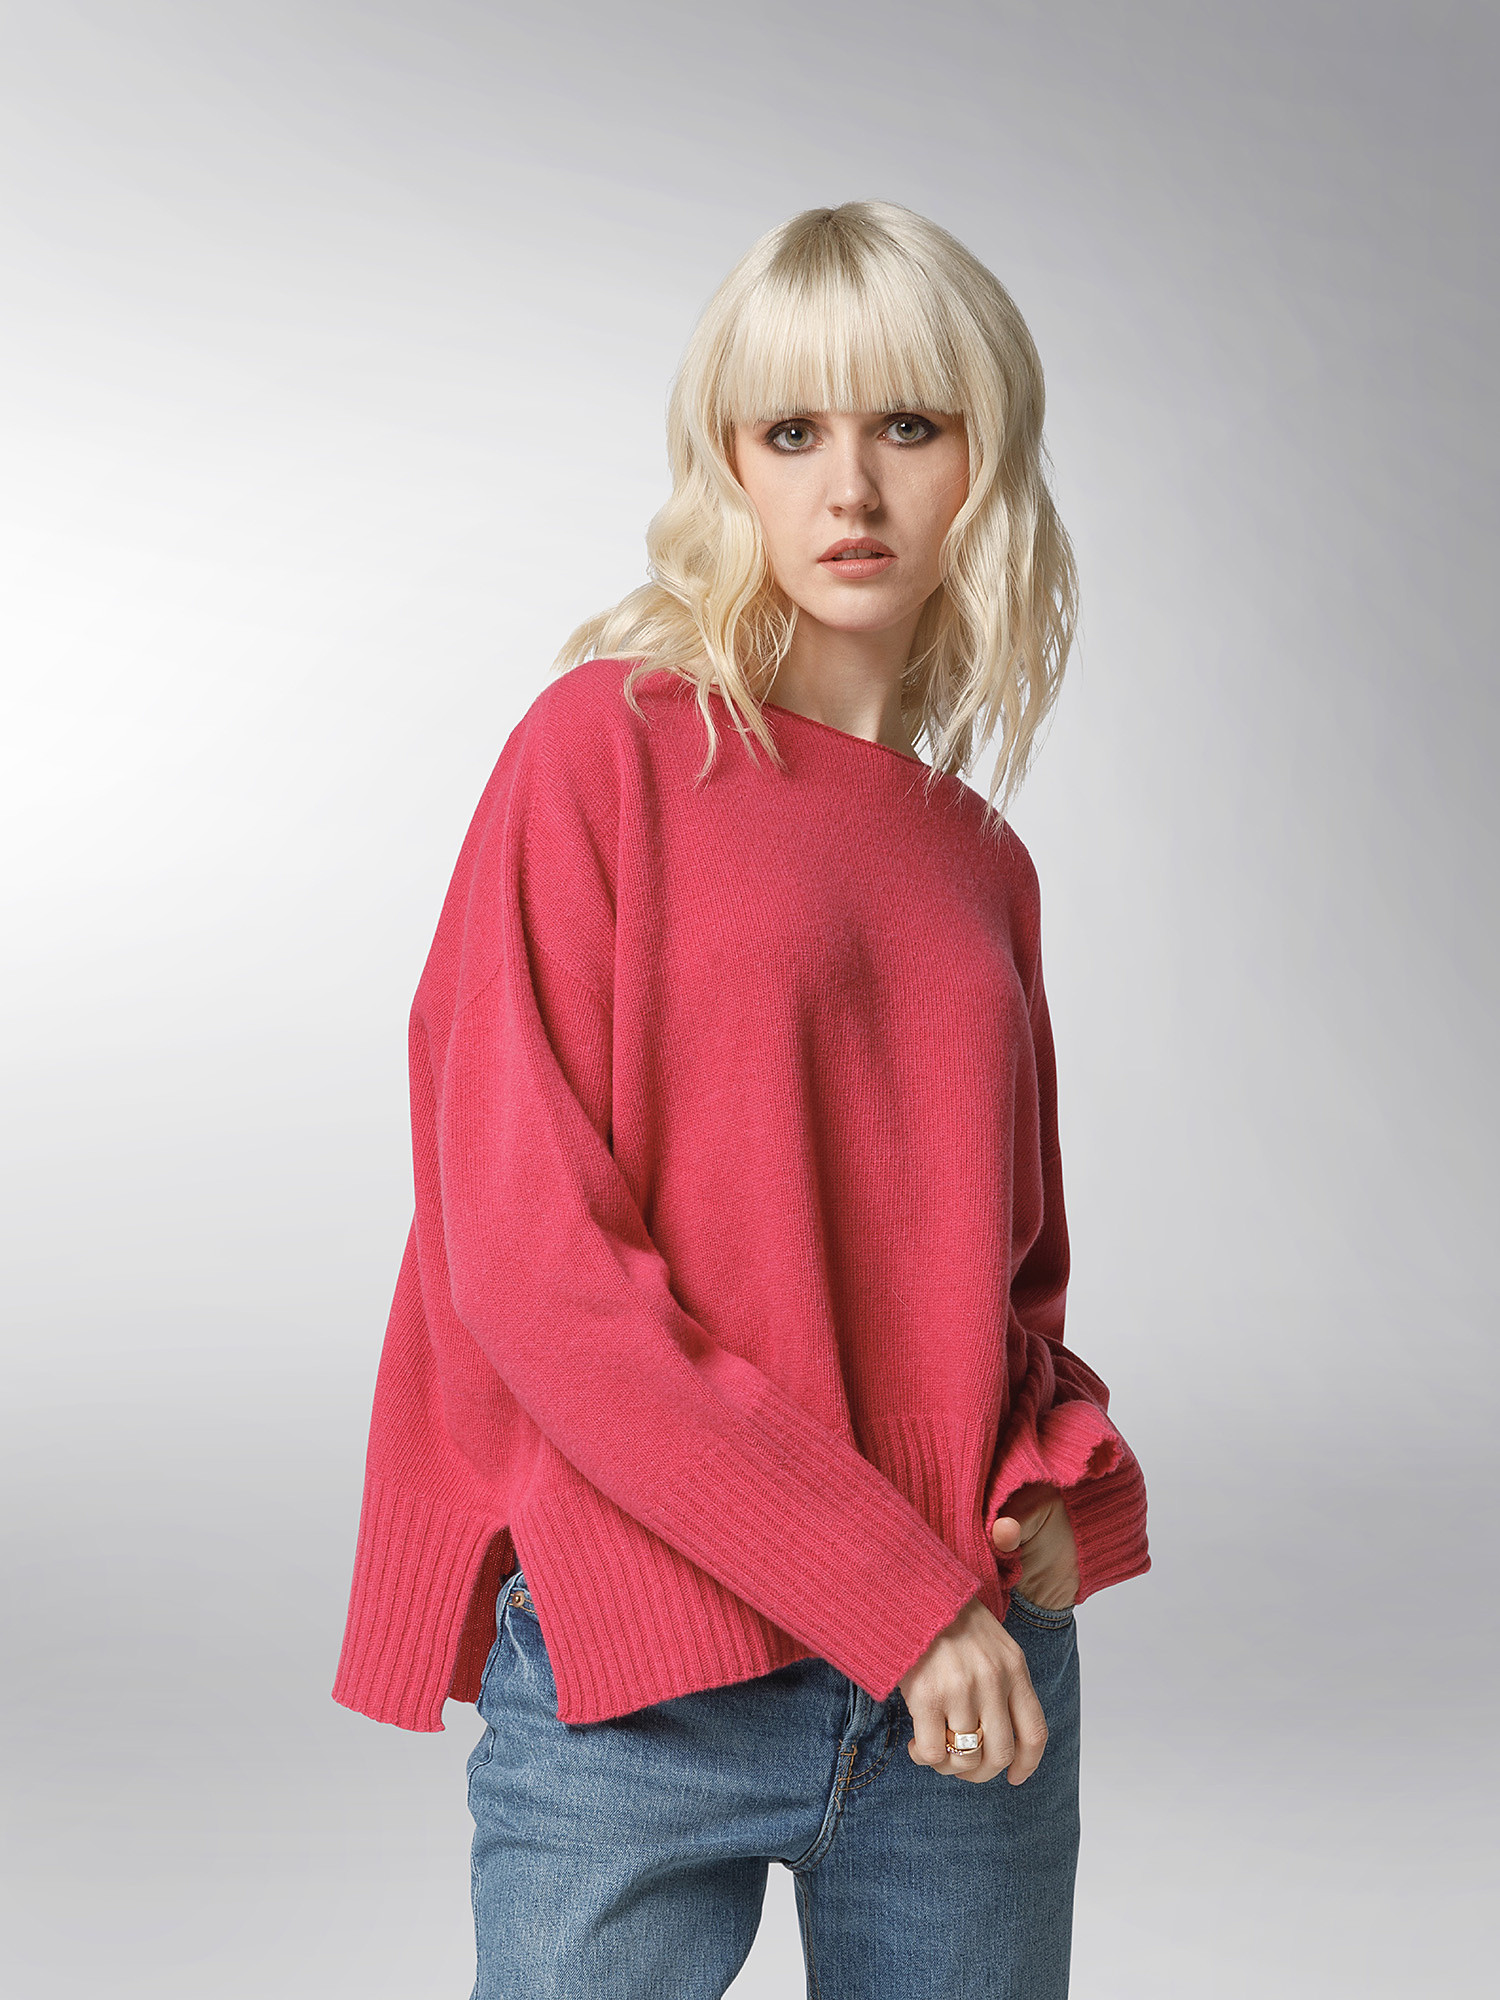 K Collection - Carded wool pullover, Pink Fuchsia, large image number 3